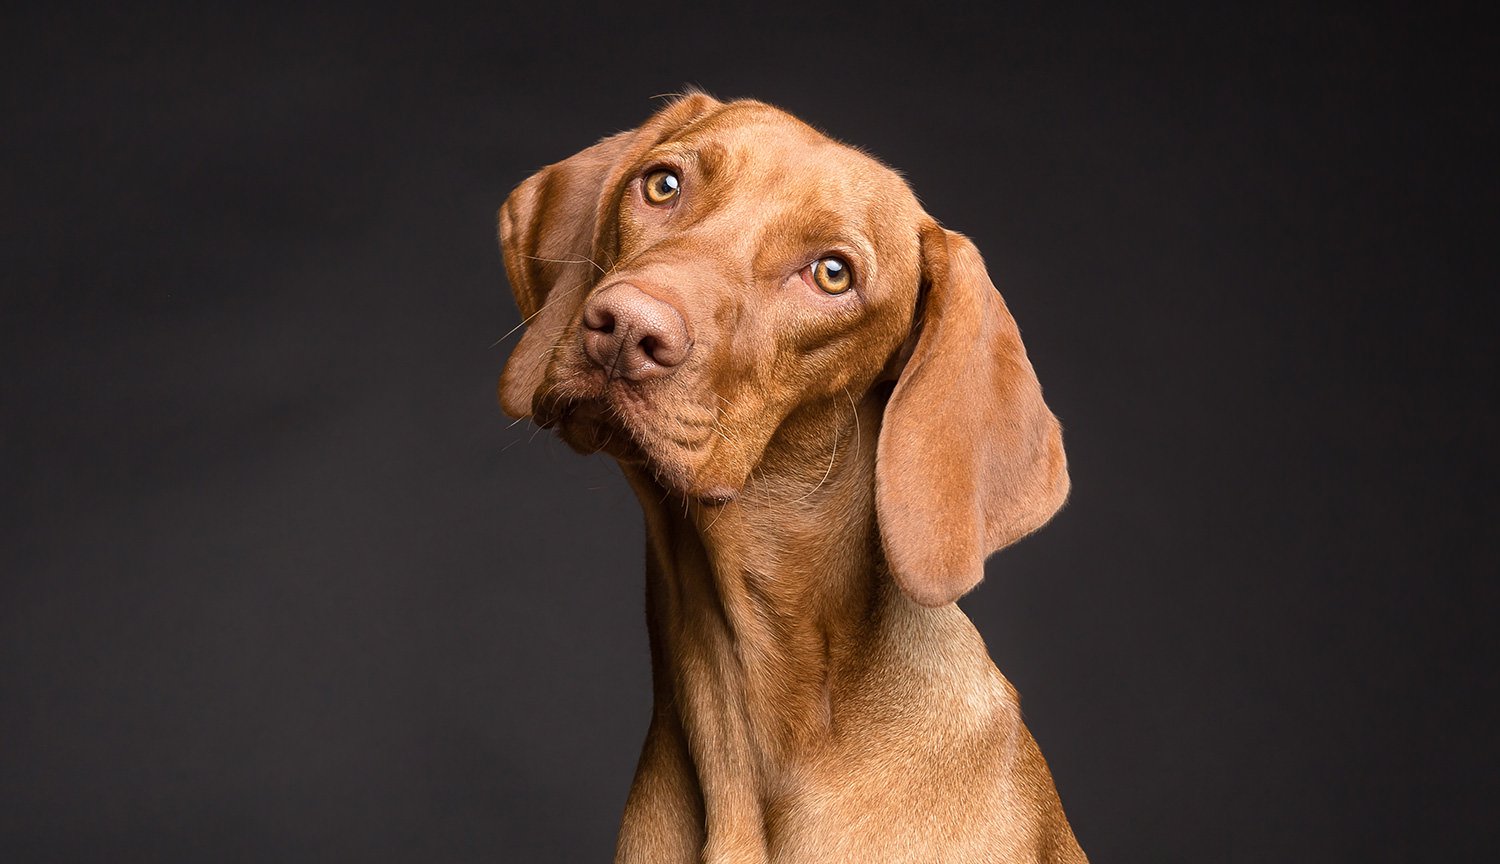 Imaging proved that dogs really do understand human speech